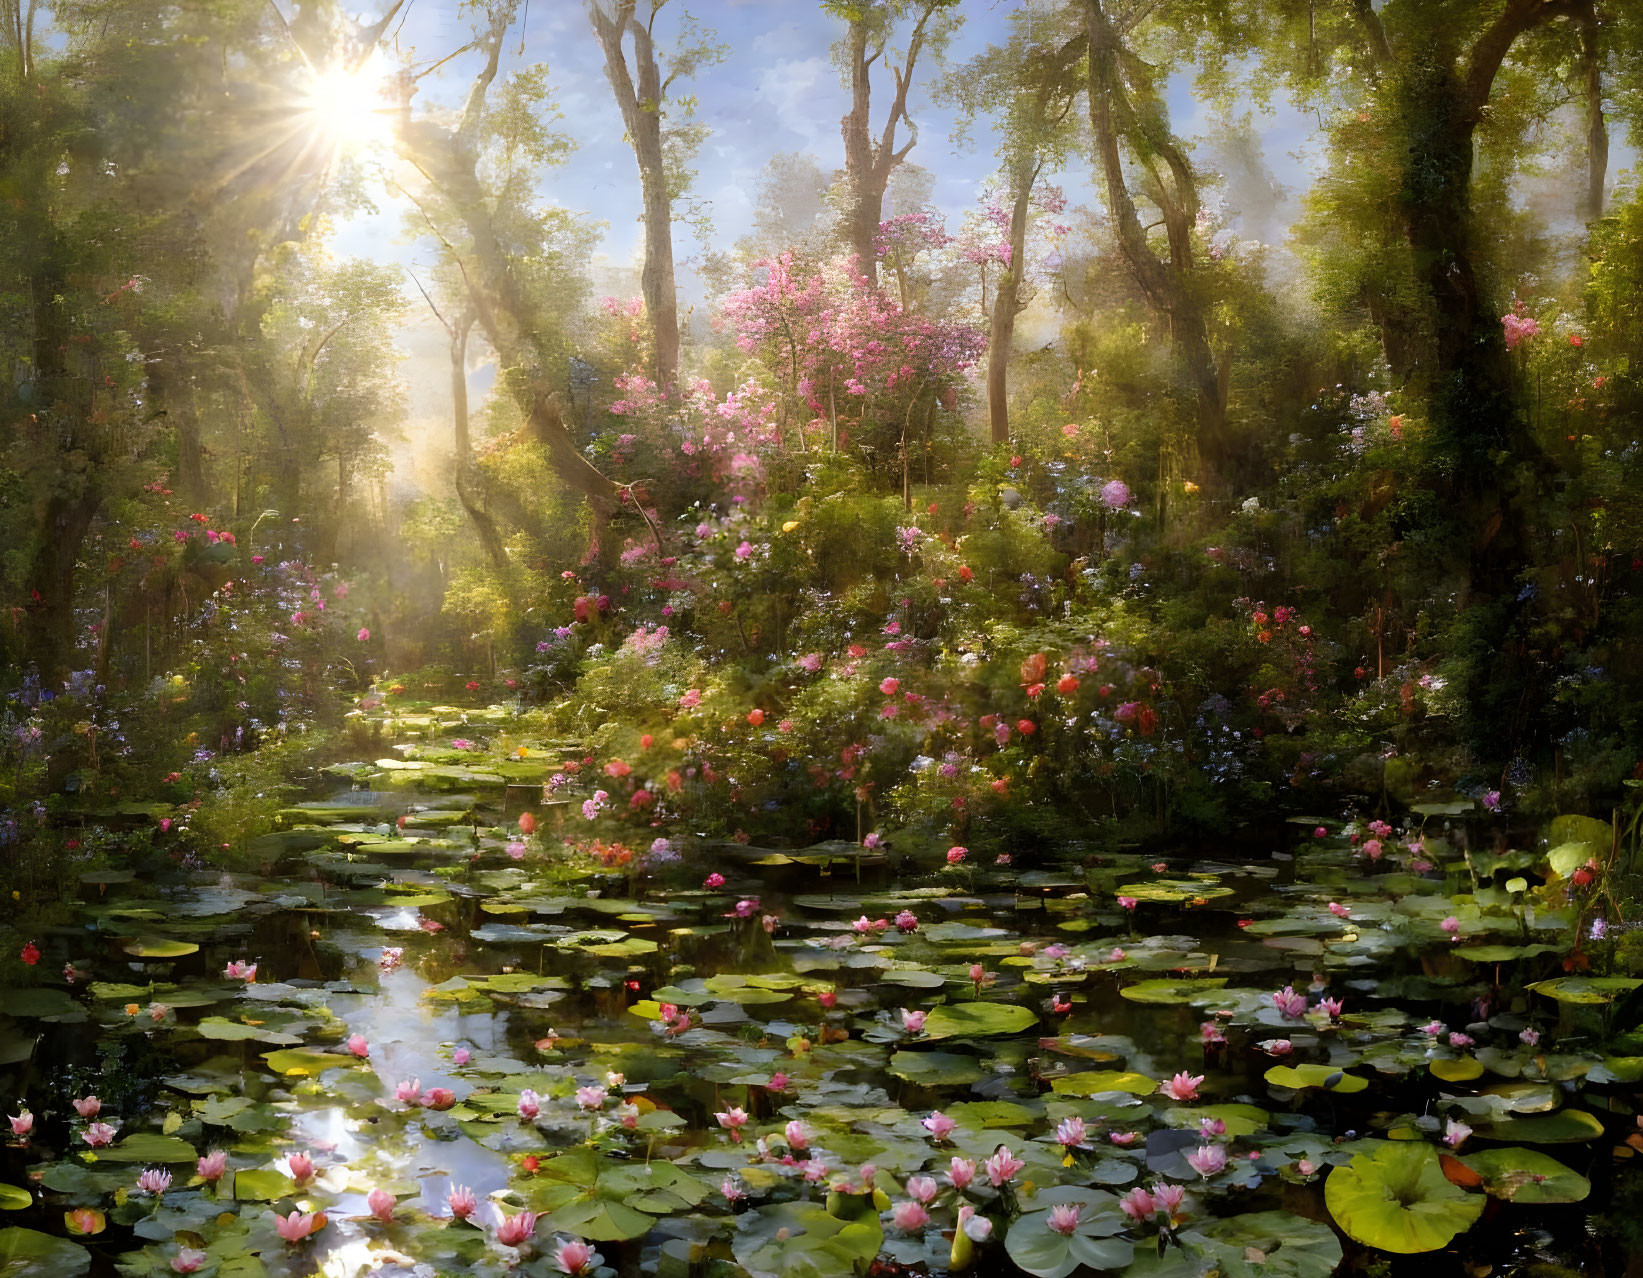 Tranquil forest scene with sunlight, blossoming flowers, and serene pond.